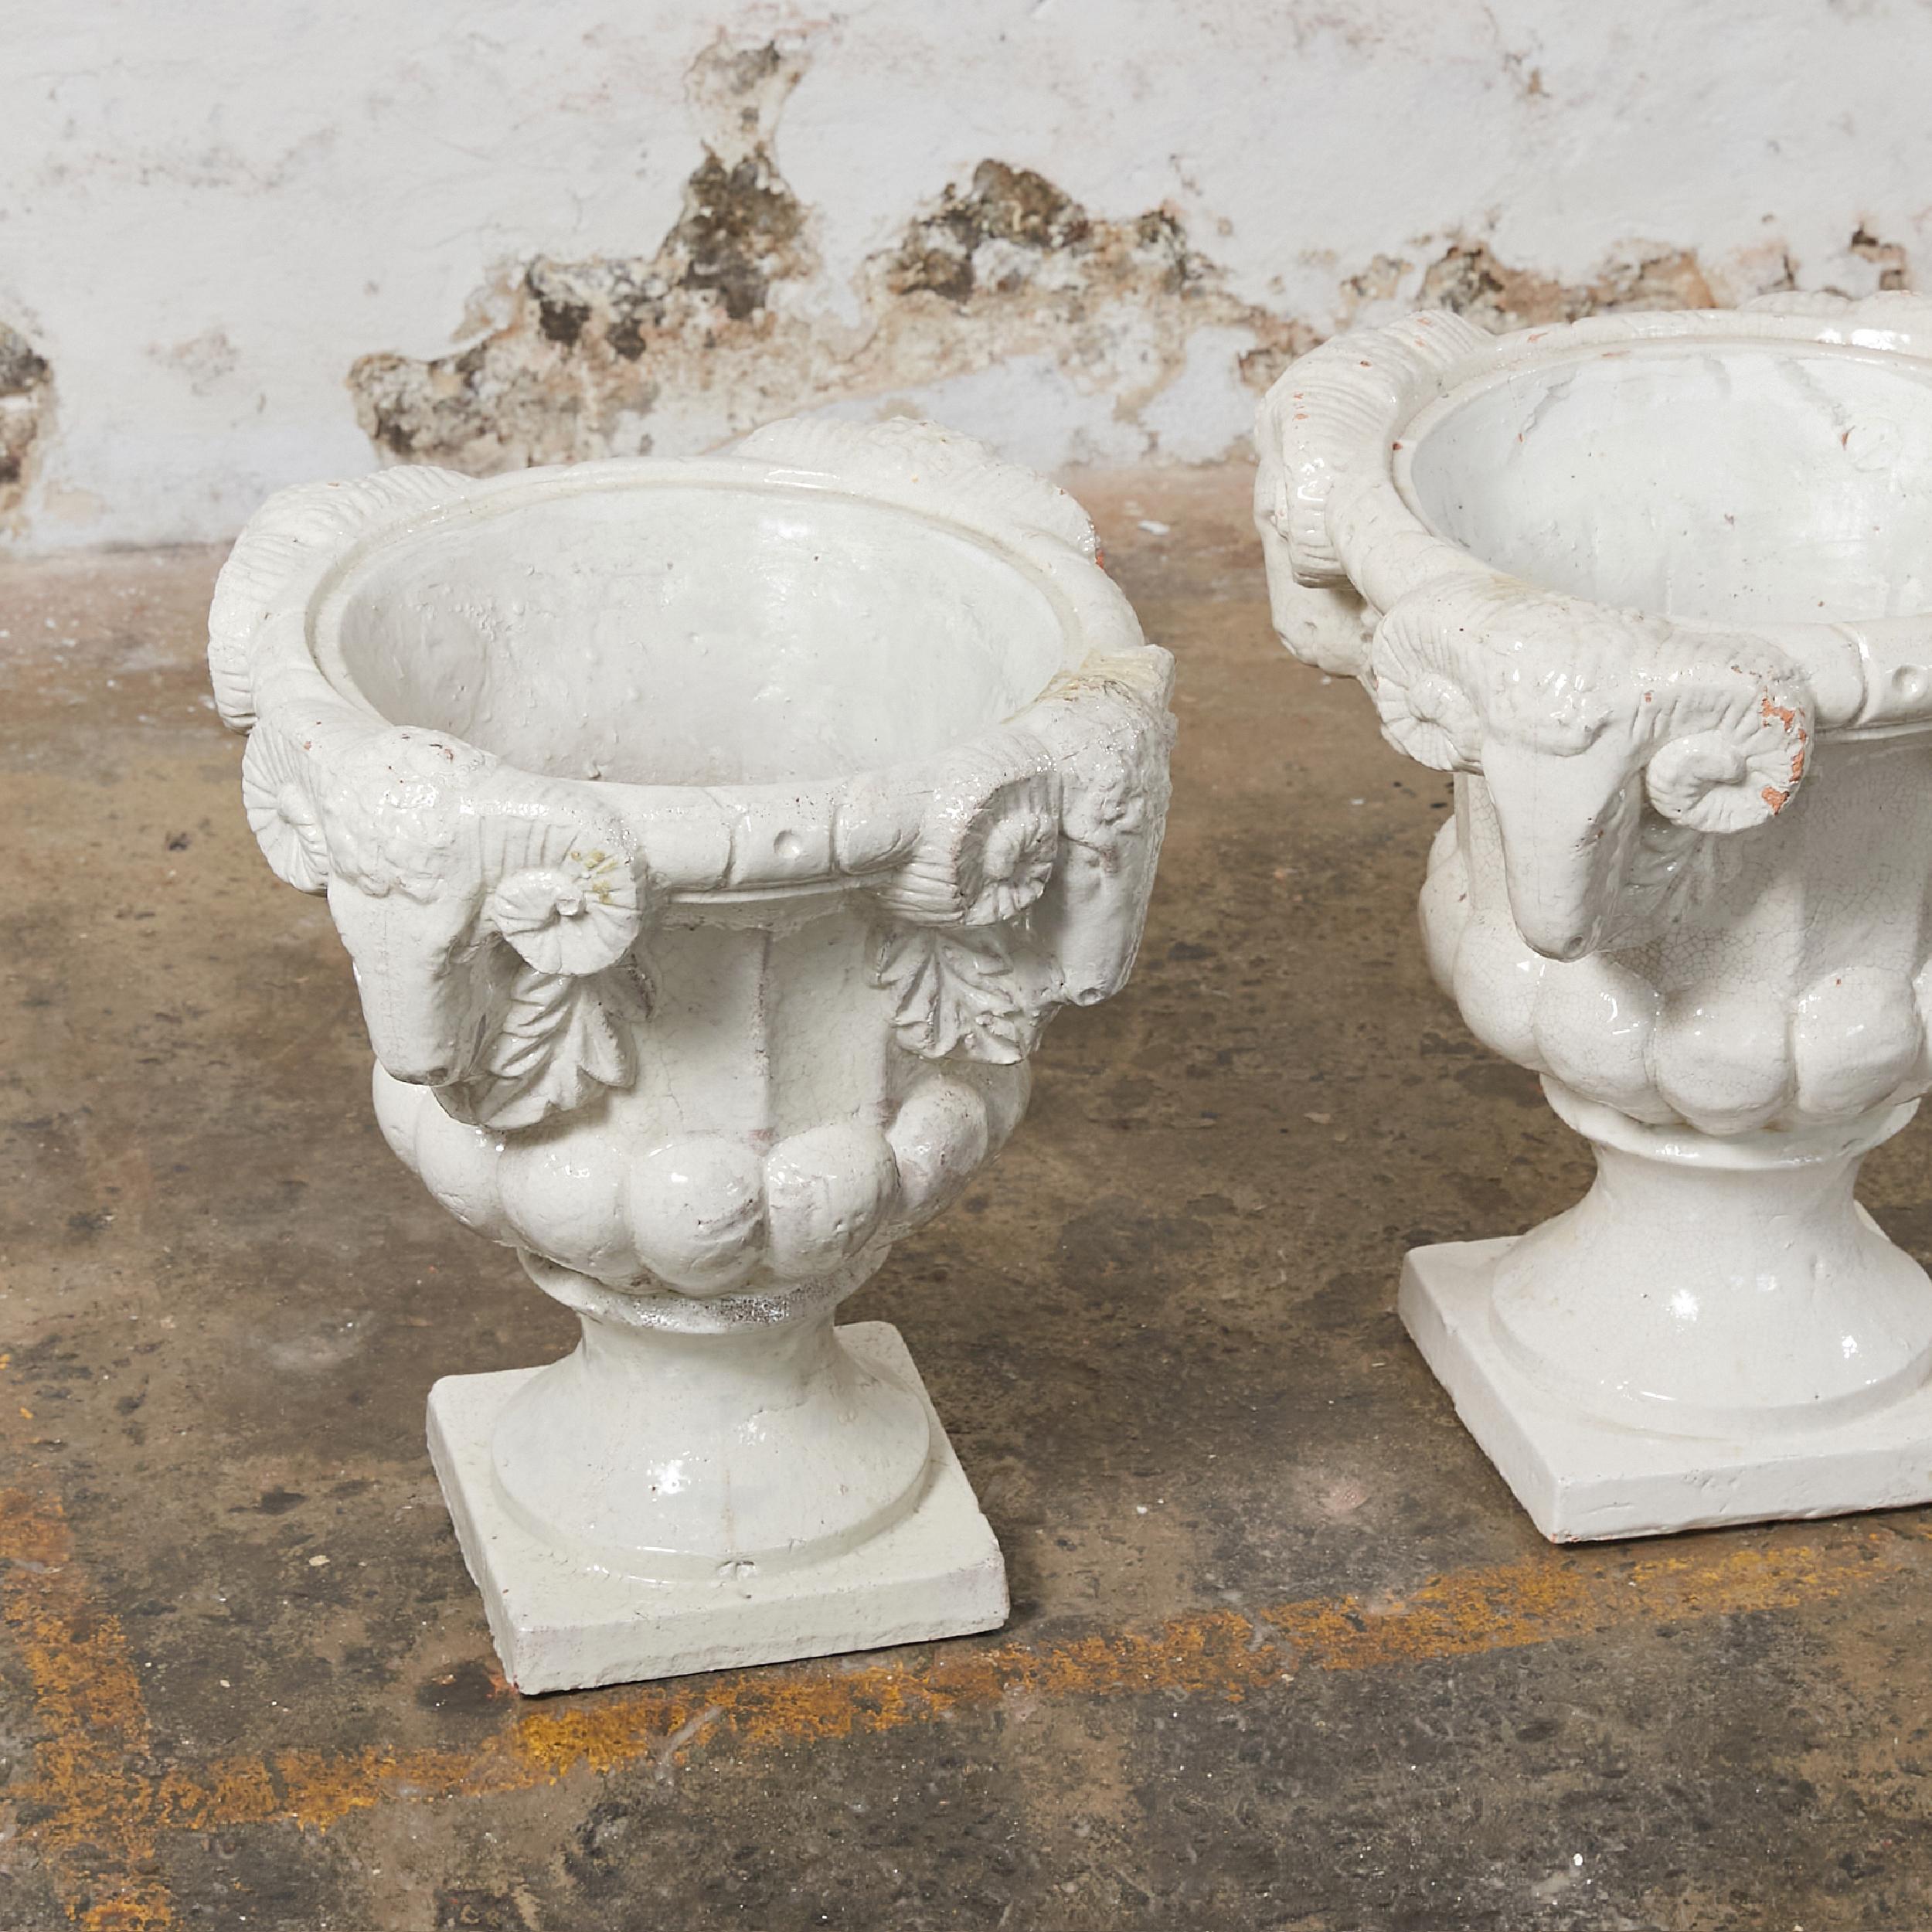 20th Century Set of Two Dutch Terracota Planters with White Crackled Glaze